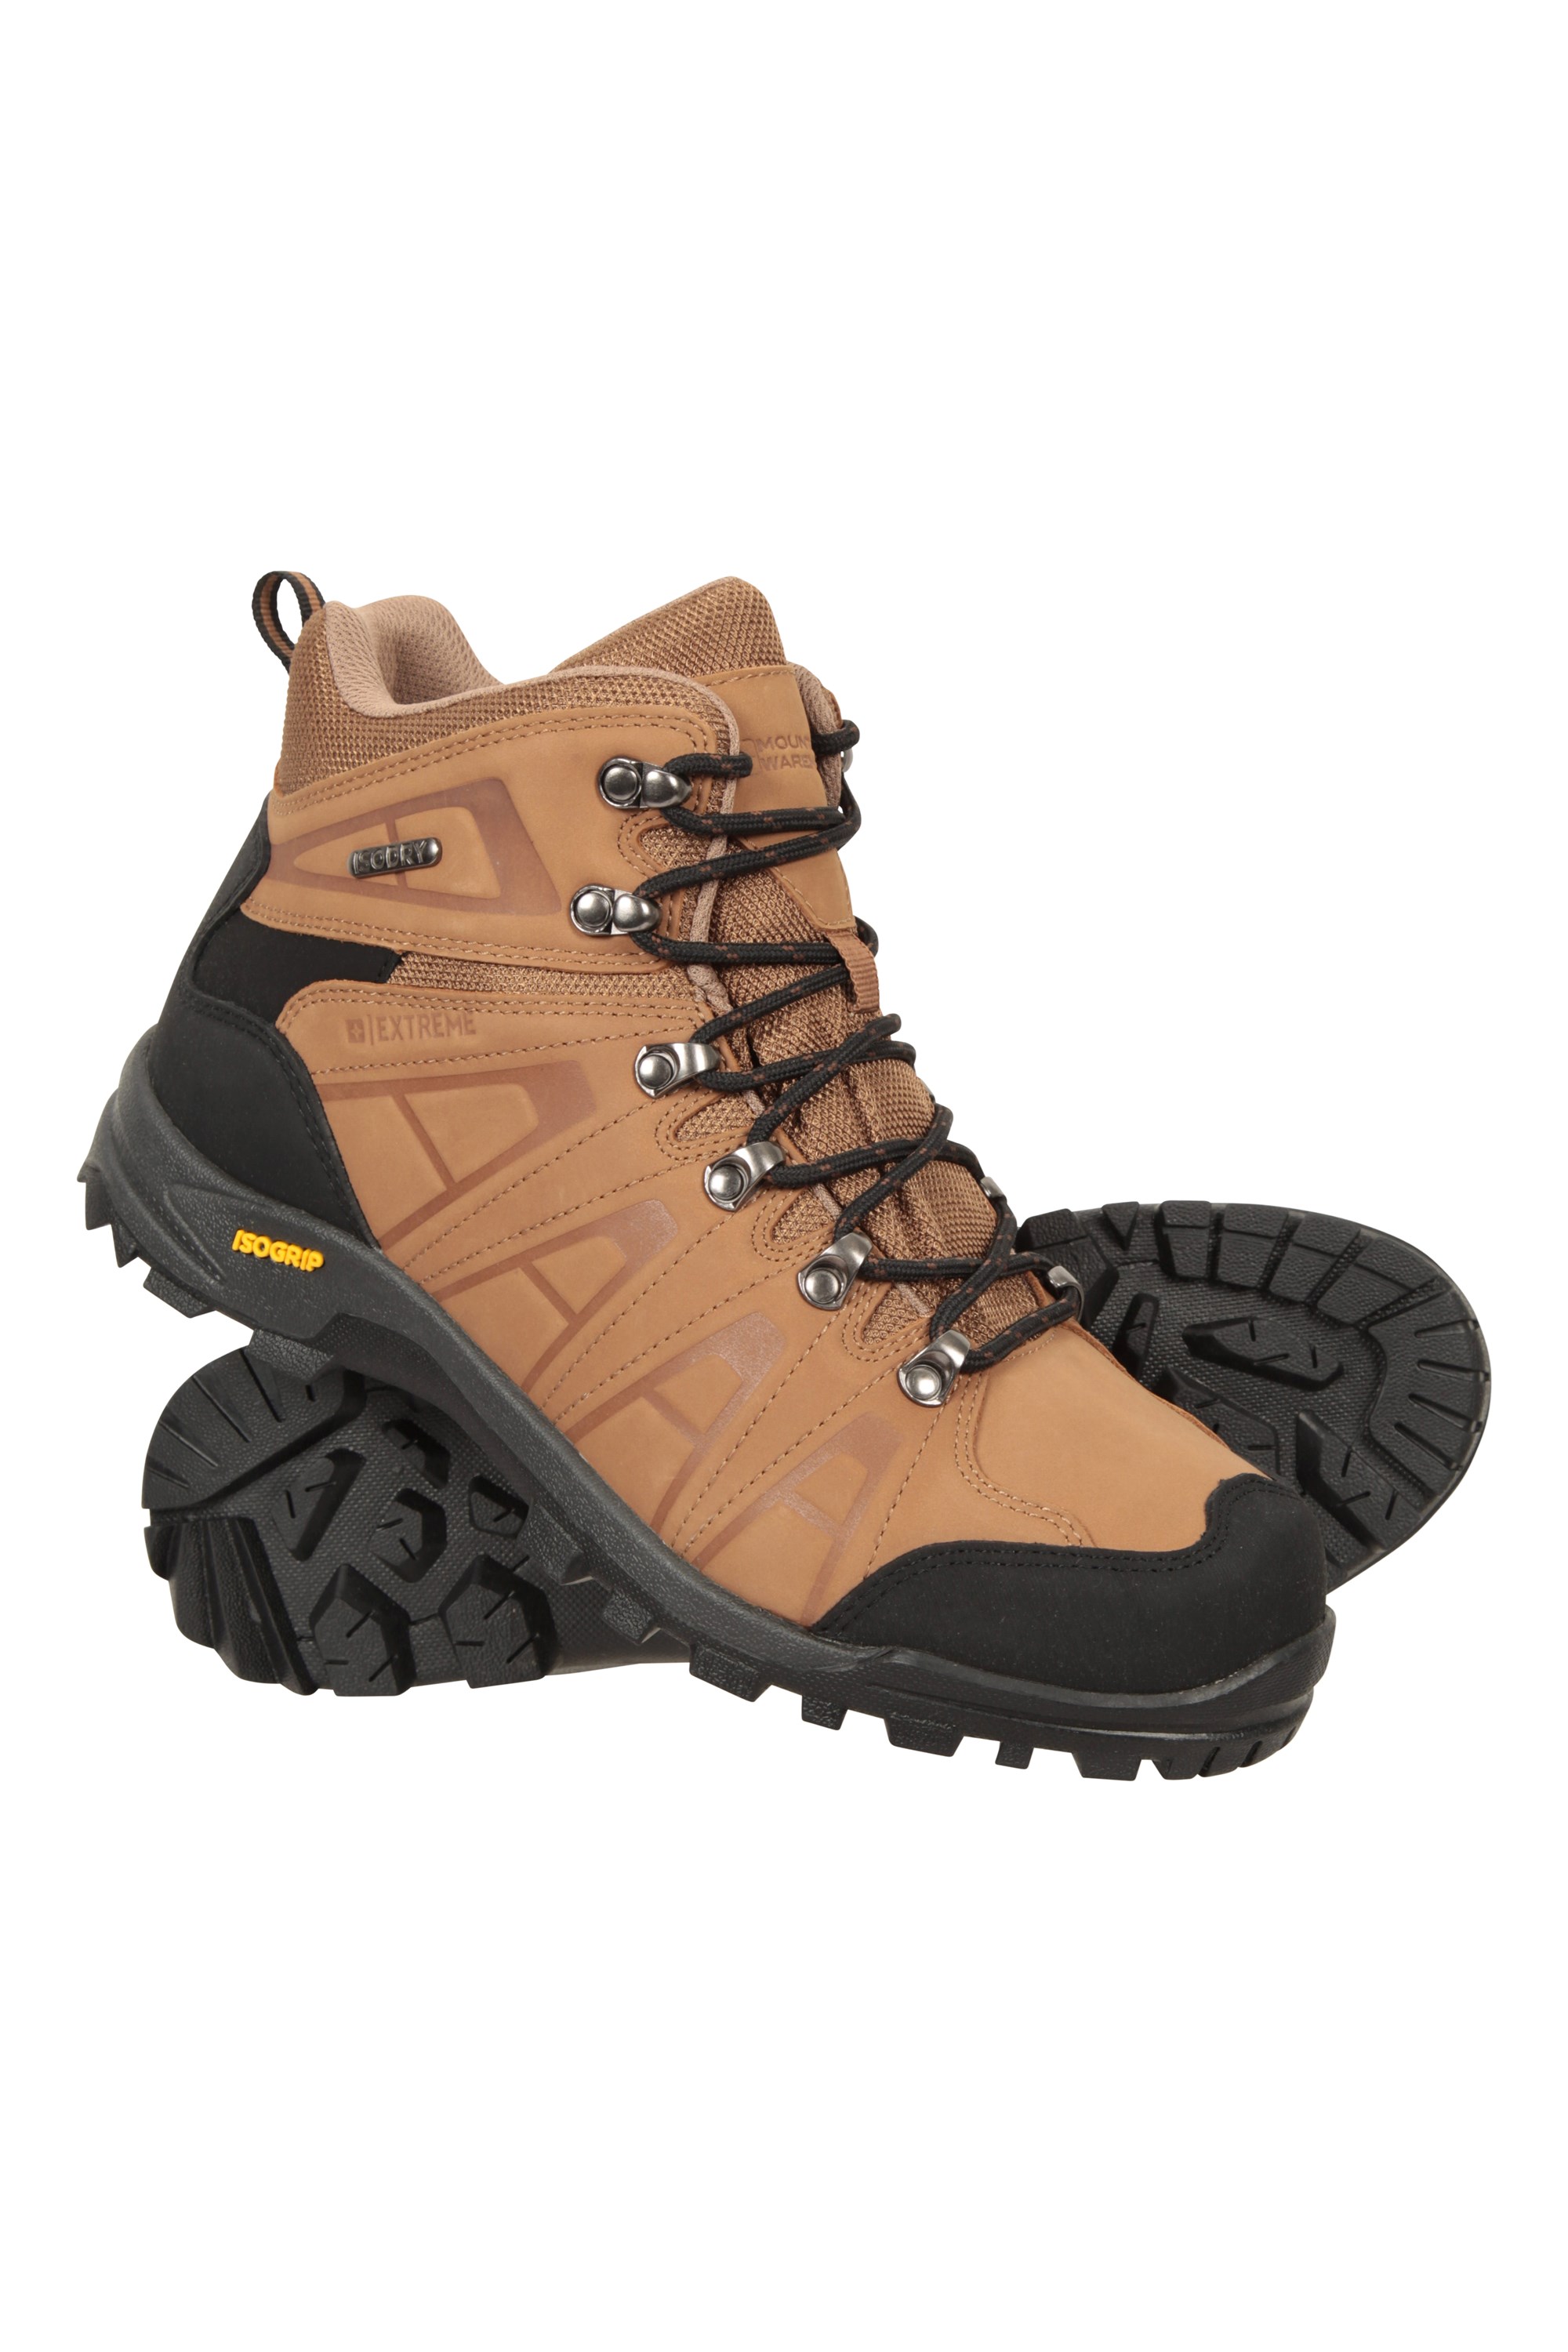 Hurricane Extreme Mens Waterproof IsoGrip Boots - Brown